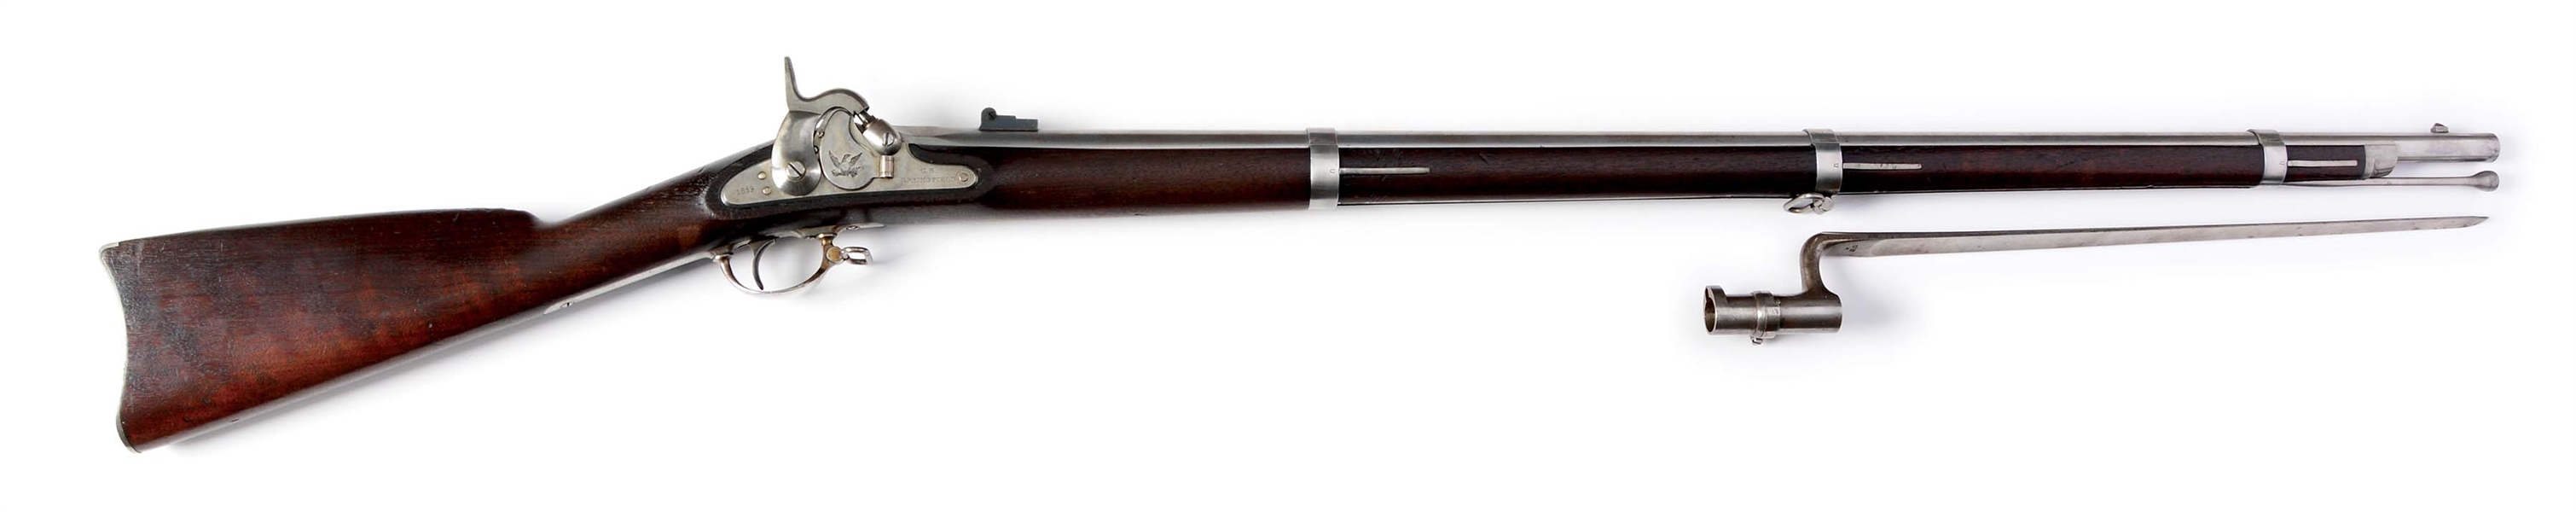 (A) U.S. MODEL 1855 PERCUSSION RIFLE MUSKET BY SPRINGFIELD WITH BAYONET.